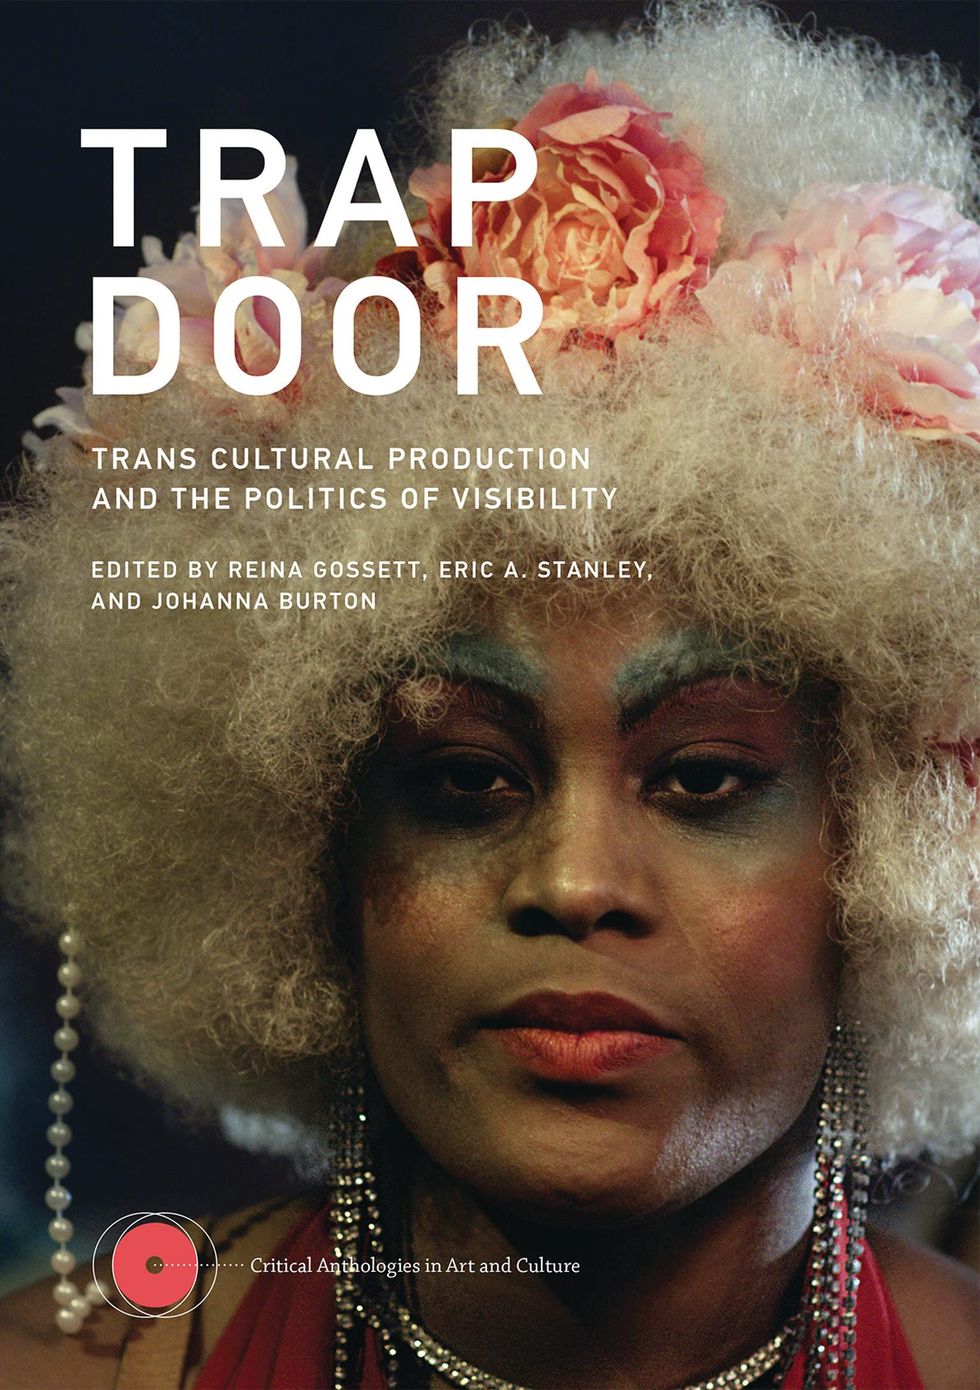 <i>Trap Door: Trans Cultural Production and the Politics of Visibility</i> Edited by Reina Gossett, Eric A. Stanley, and Johanna Burton